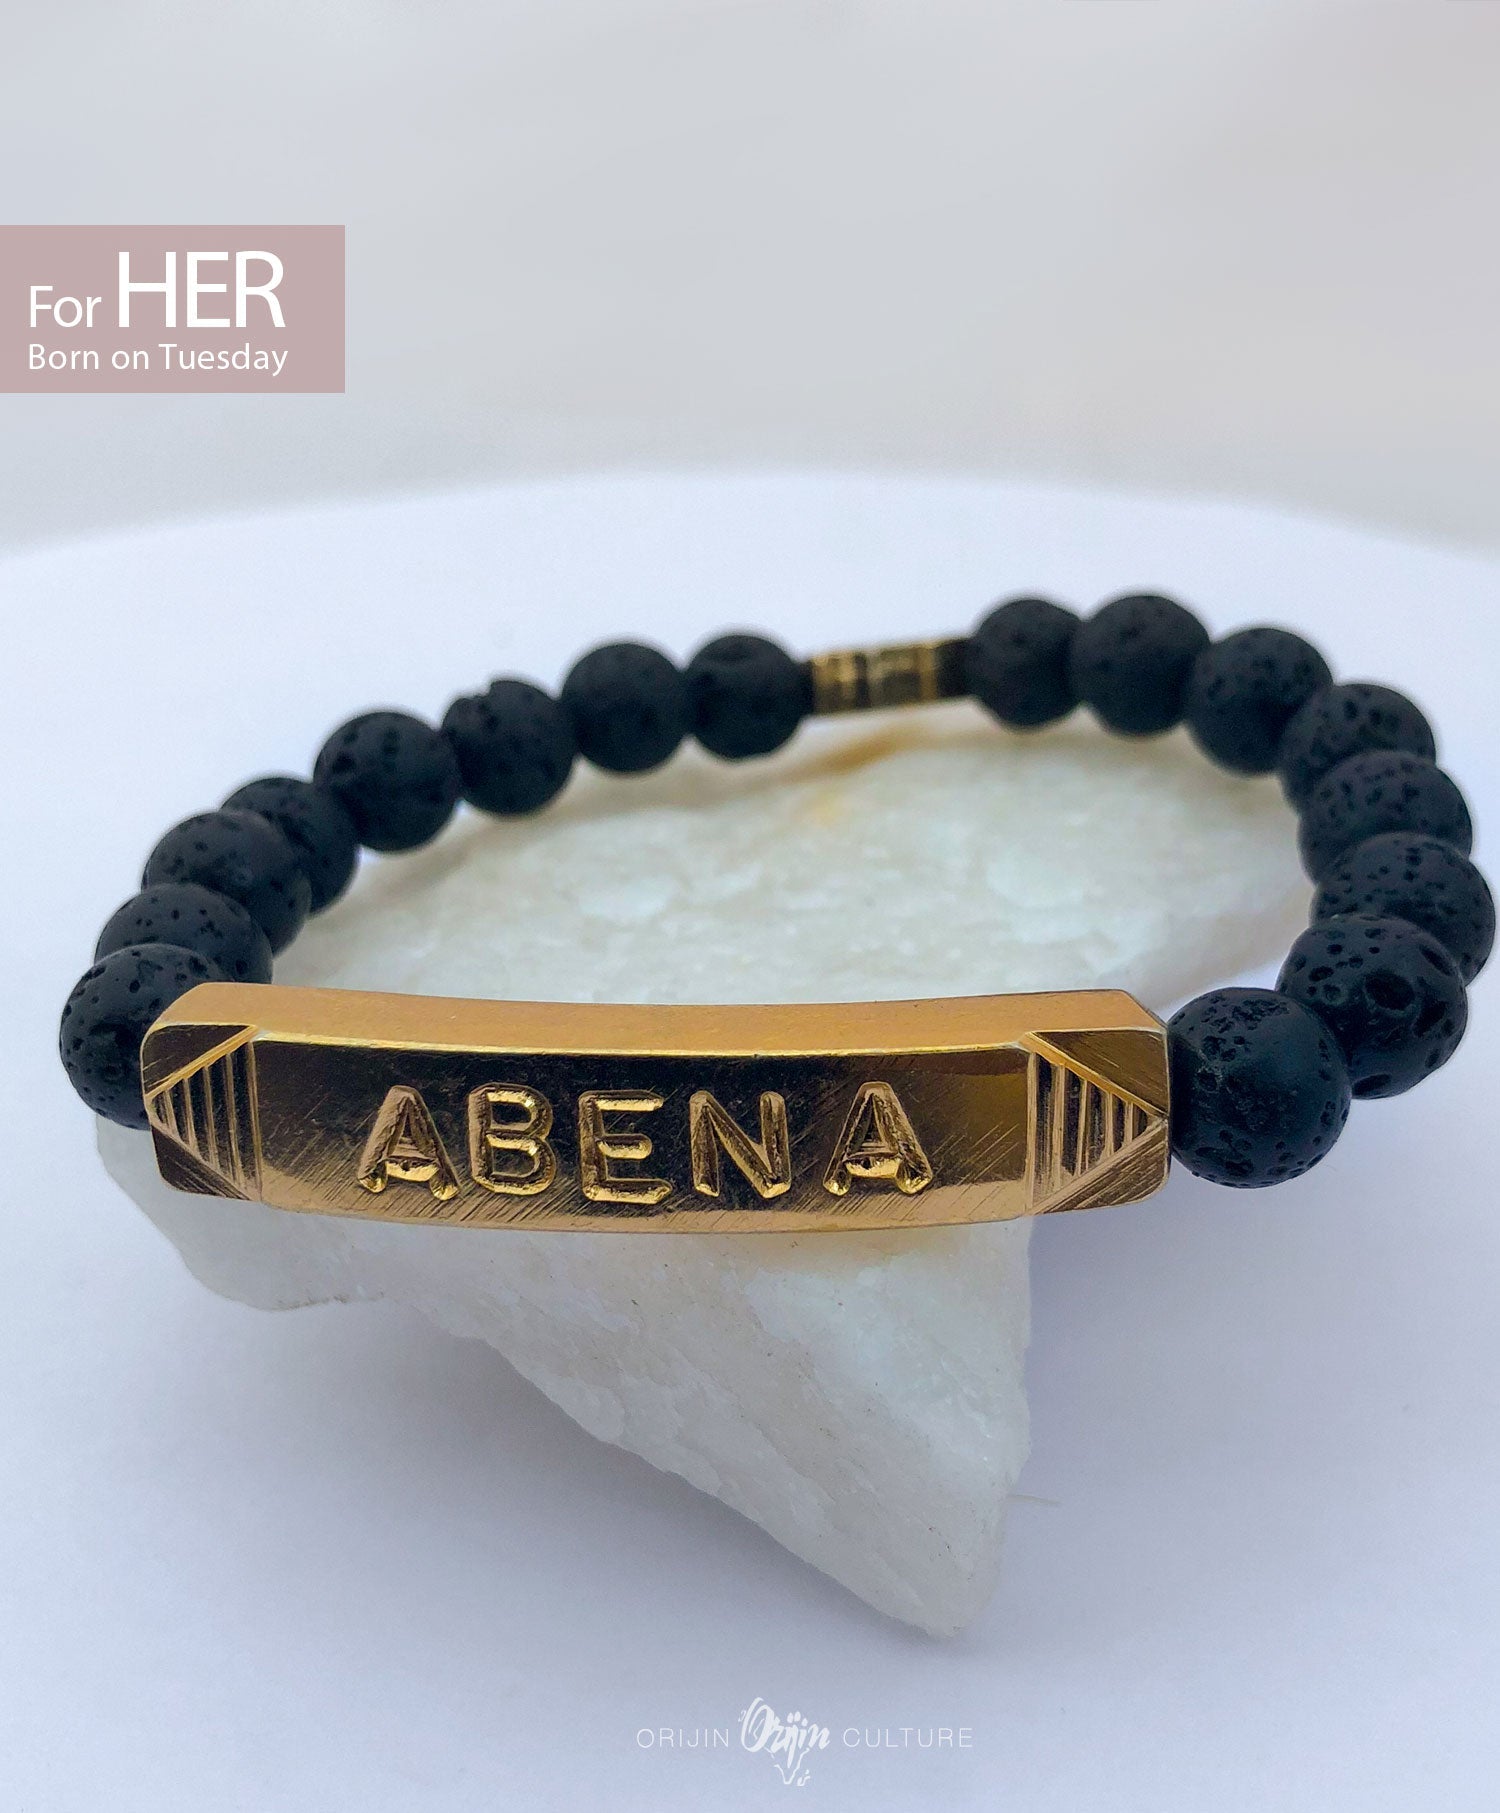 Abena Identity Beads | For (HER) Born on Tuesday